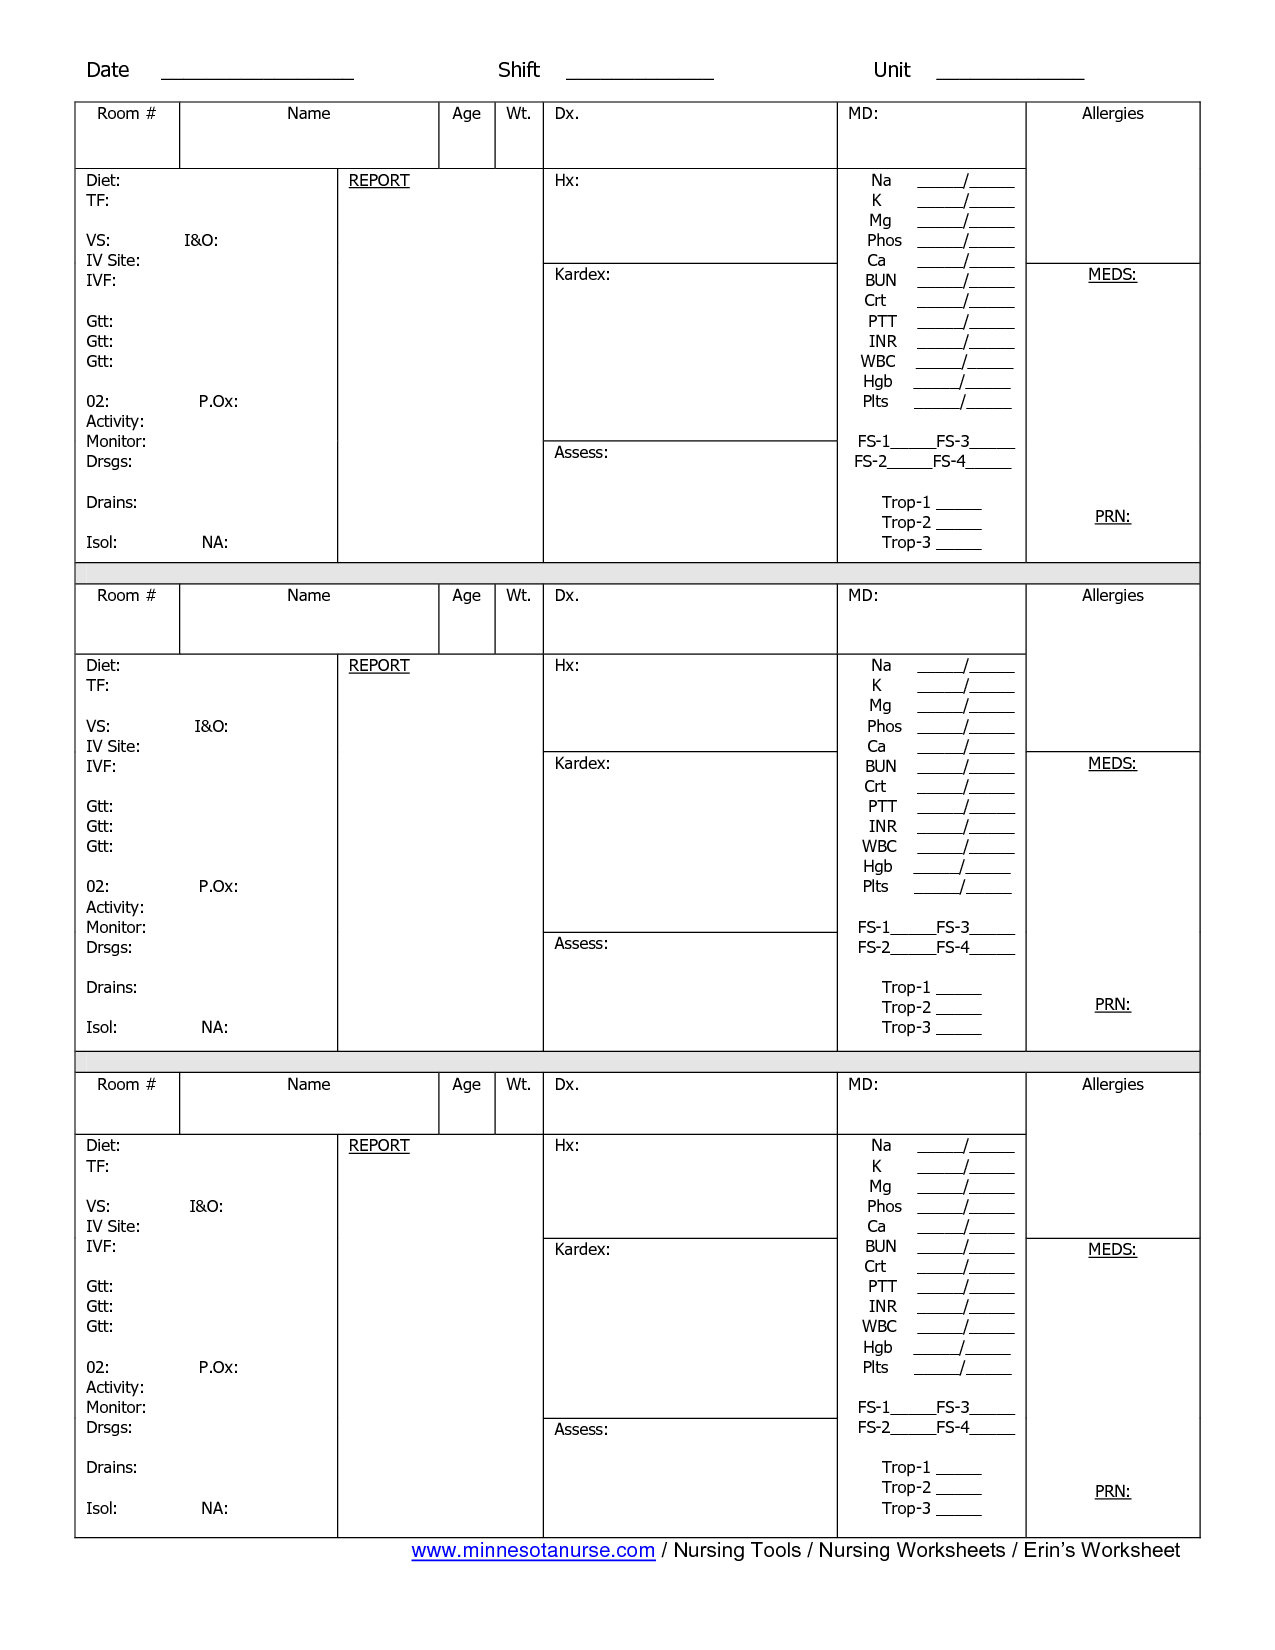 Nursing Shift Report Forms Nurse Form Change Example Sheet In Charge Nurse Report Sheet Template